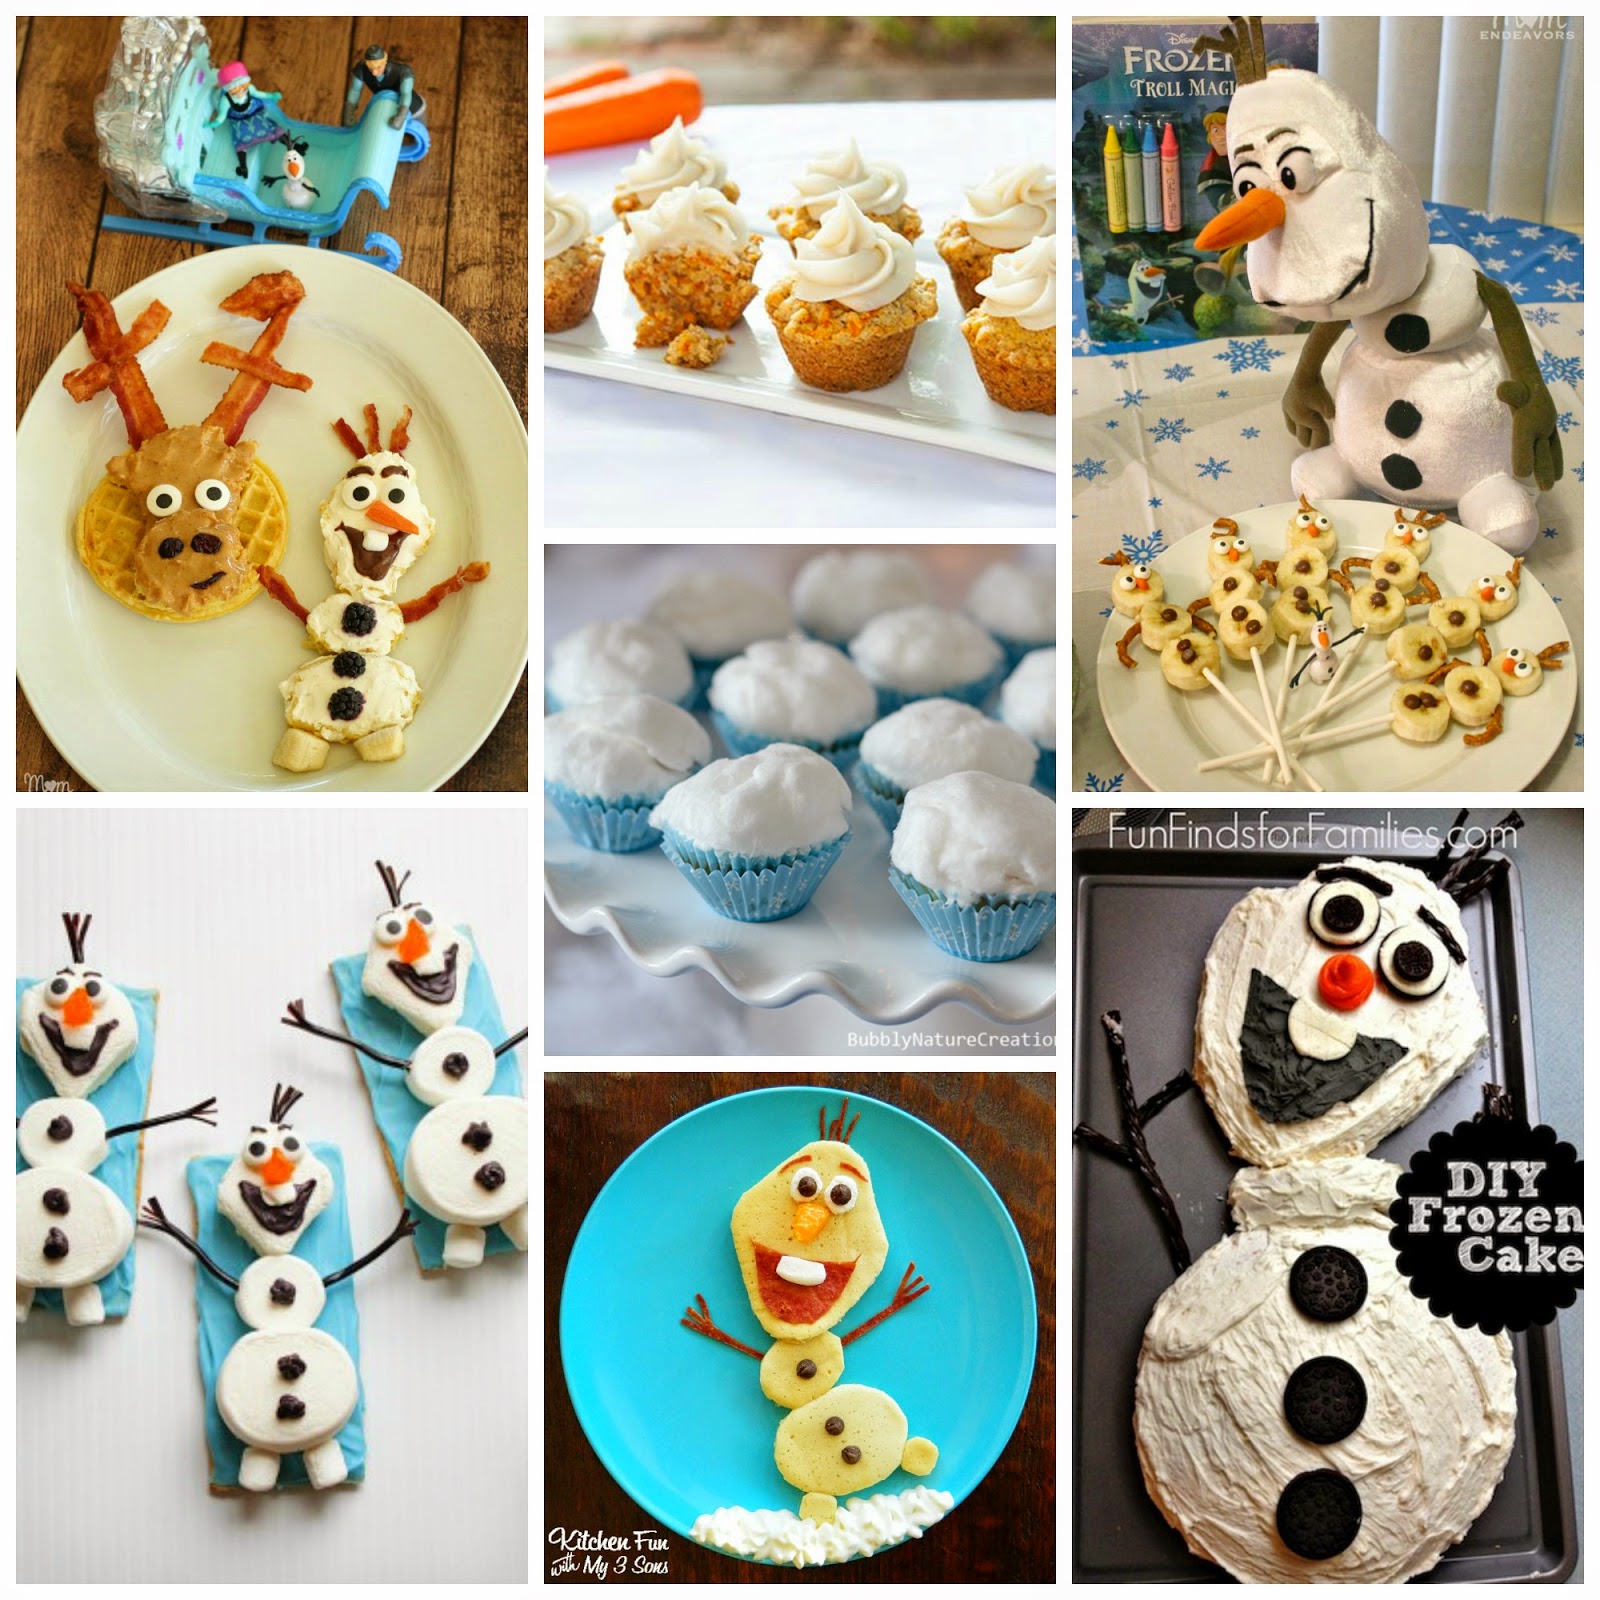 http://bluezoneonly.blogspot.com.au/2014/05/frozen-sweets-and-special-treats.html